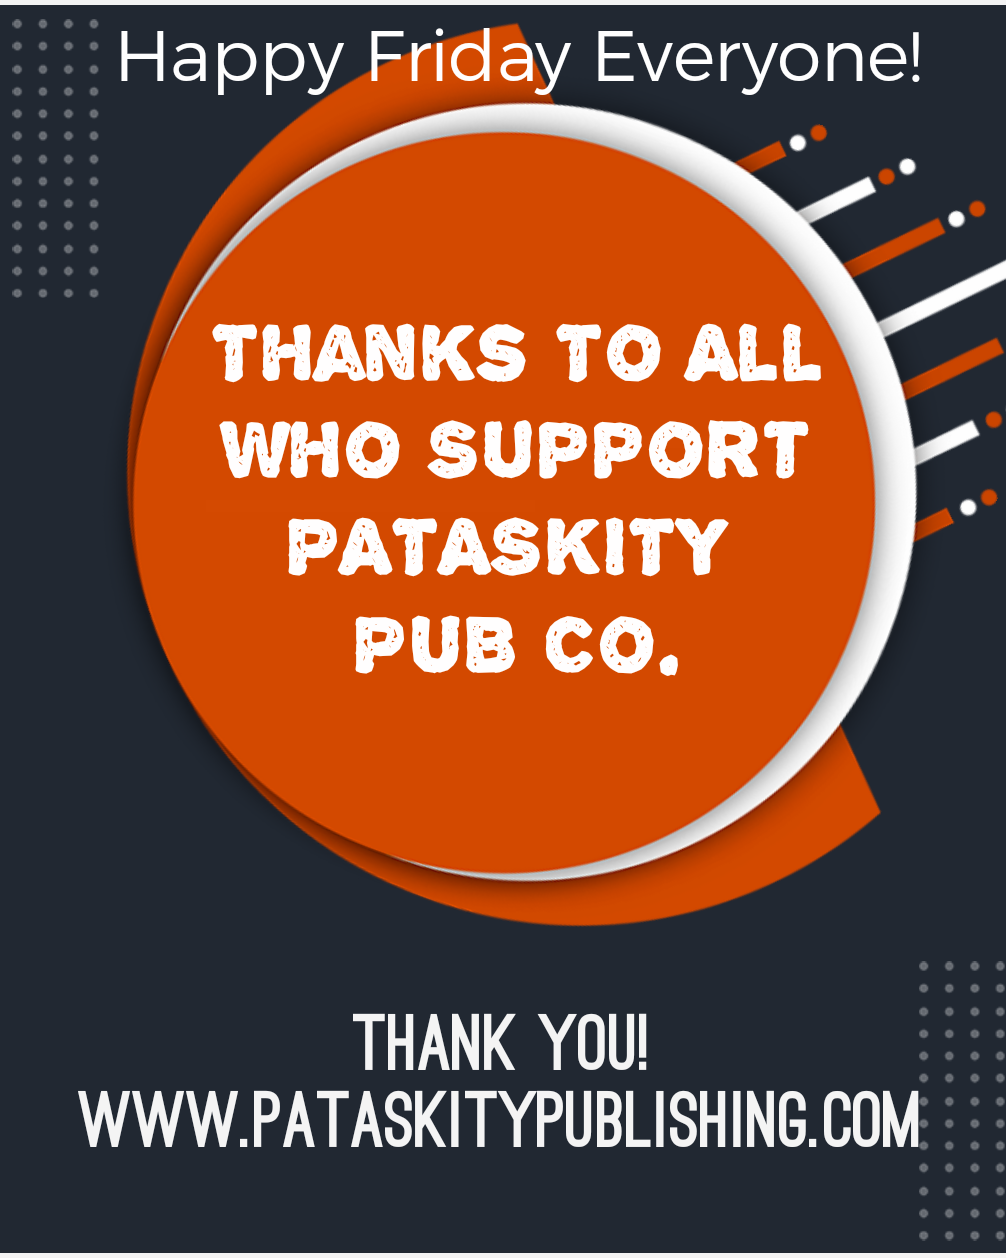 Thank You From Pataskity Publishing Co.